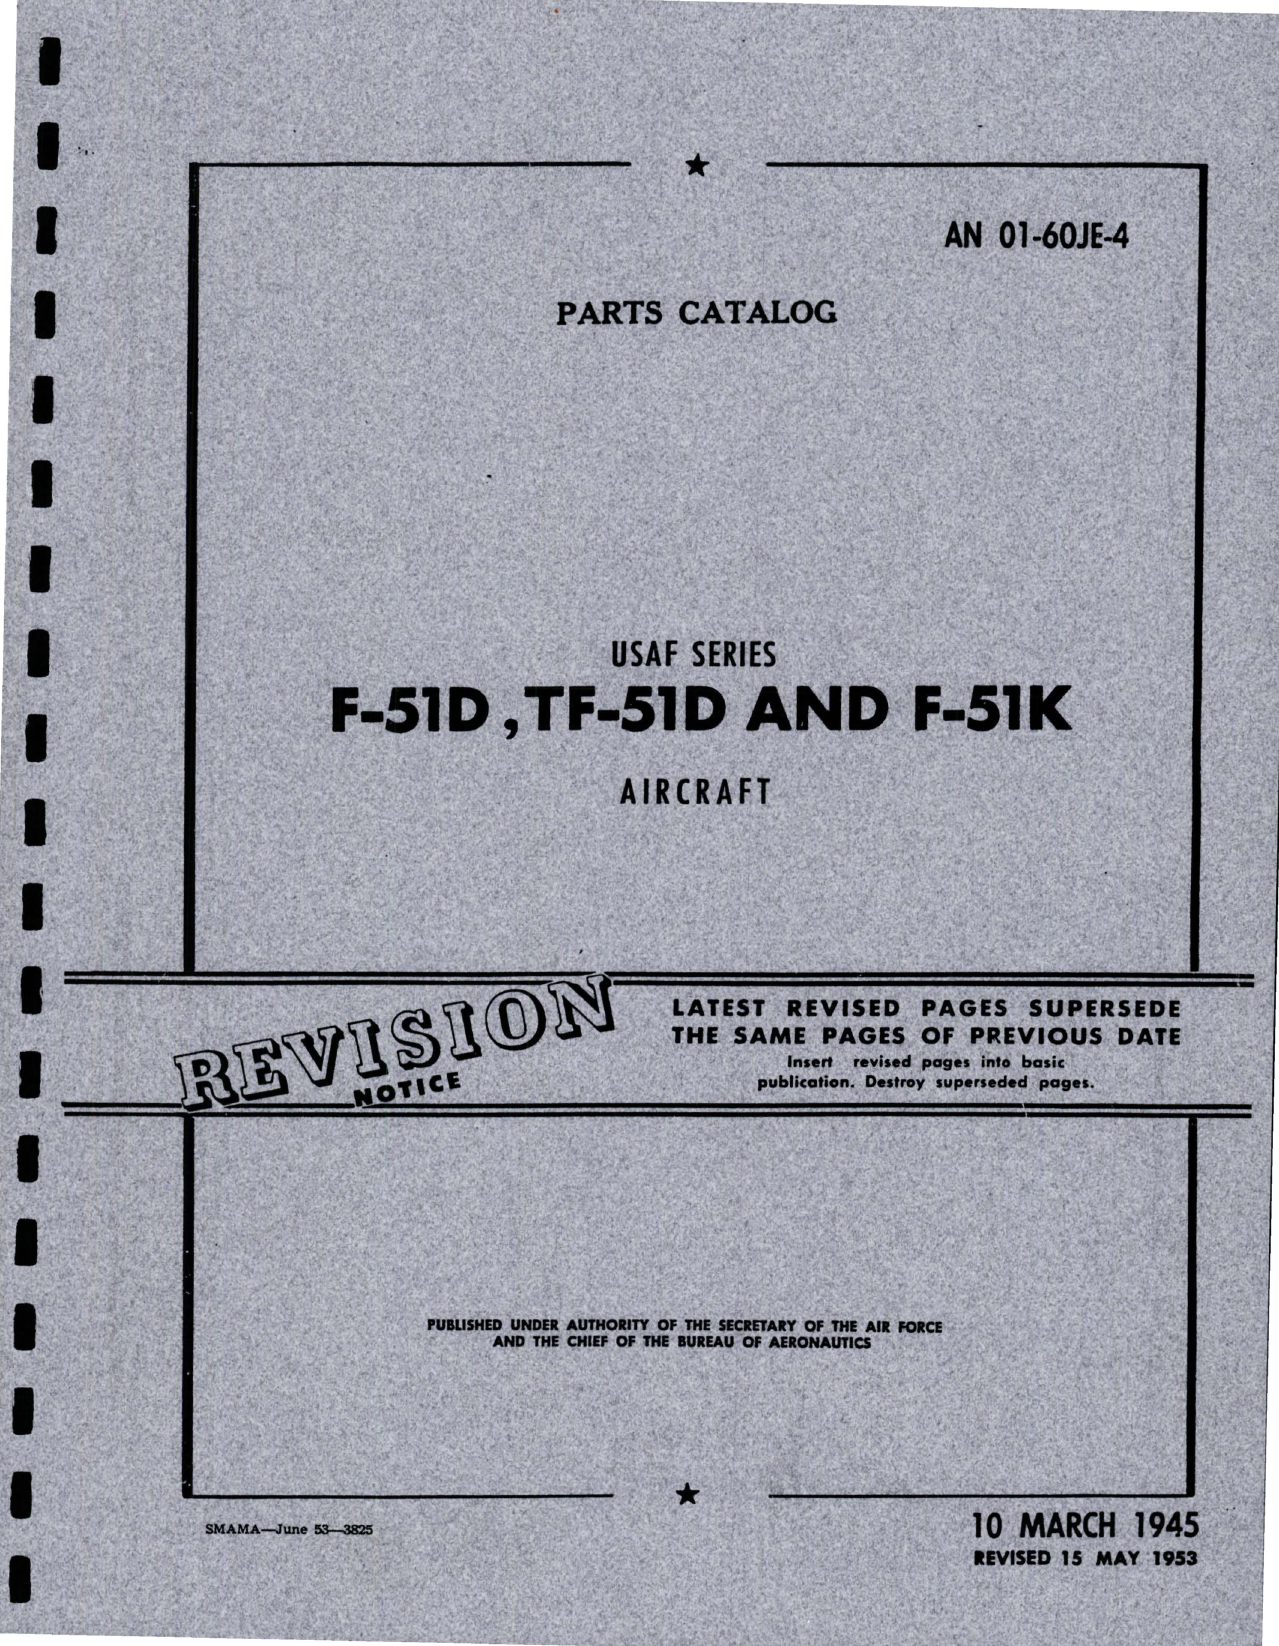 Sample page 1 from AirCorps Library document: Parts Catalog for F-51D, TF-51D and F-51K